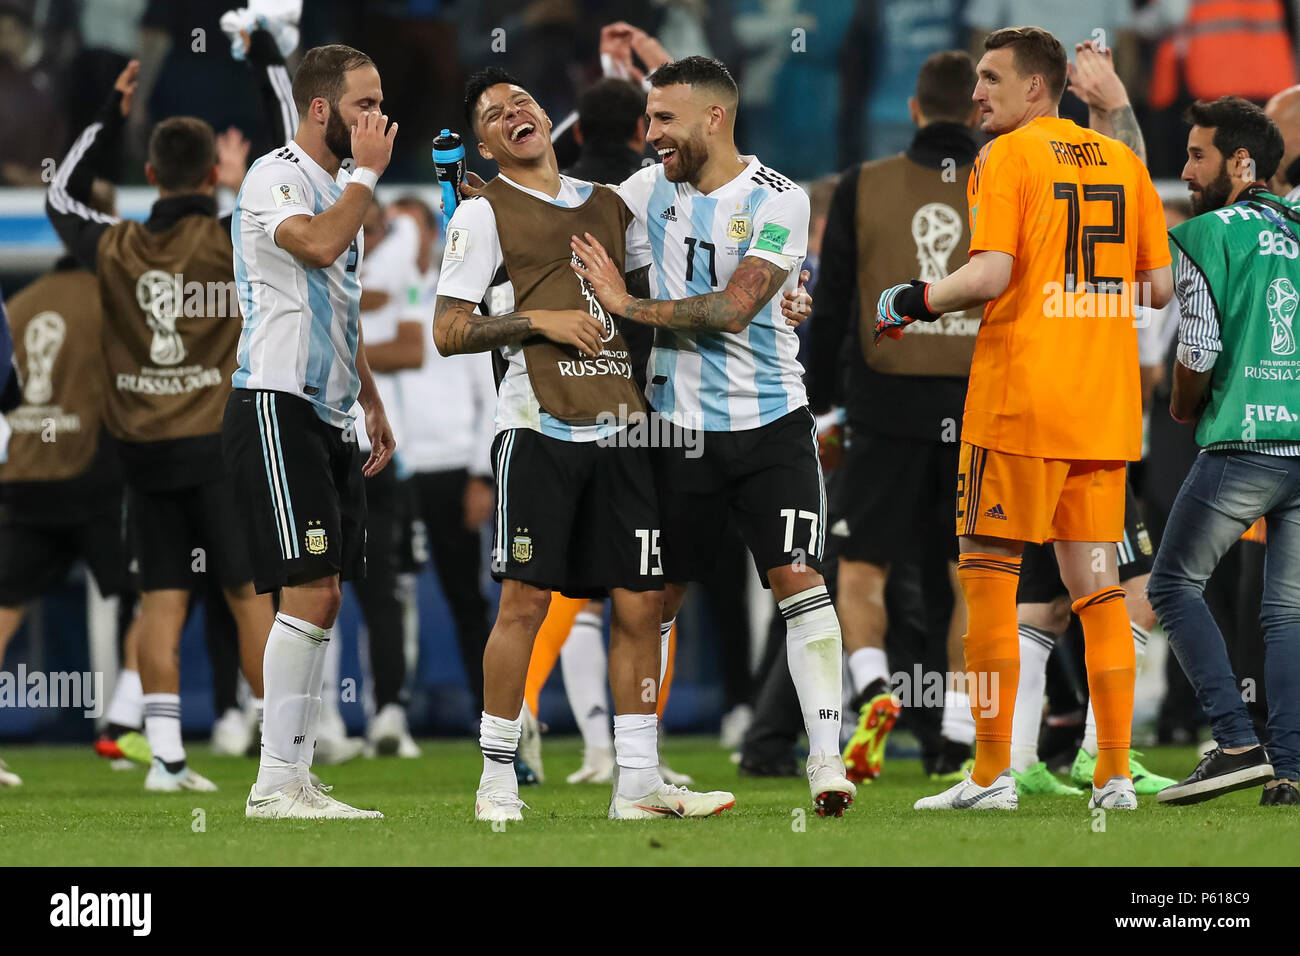 St Petersburg, Russia. 26th Jun, 2018. Enzo Perez of Argentina and Nicolas Otamendi of Argentina celebrate after the 2018 FIFA World Cup Group D match between Nigeria and Argentina at Saint Petersburg Stadium on June 26th 2018 in Saint Petersburg, Russia. (Photo by Daniel Chesterton/phcimages.com) Credit: PHC Images/Alamy Live News Stock Photo